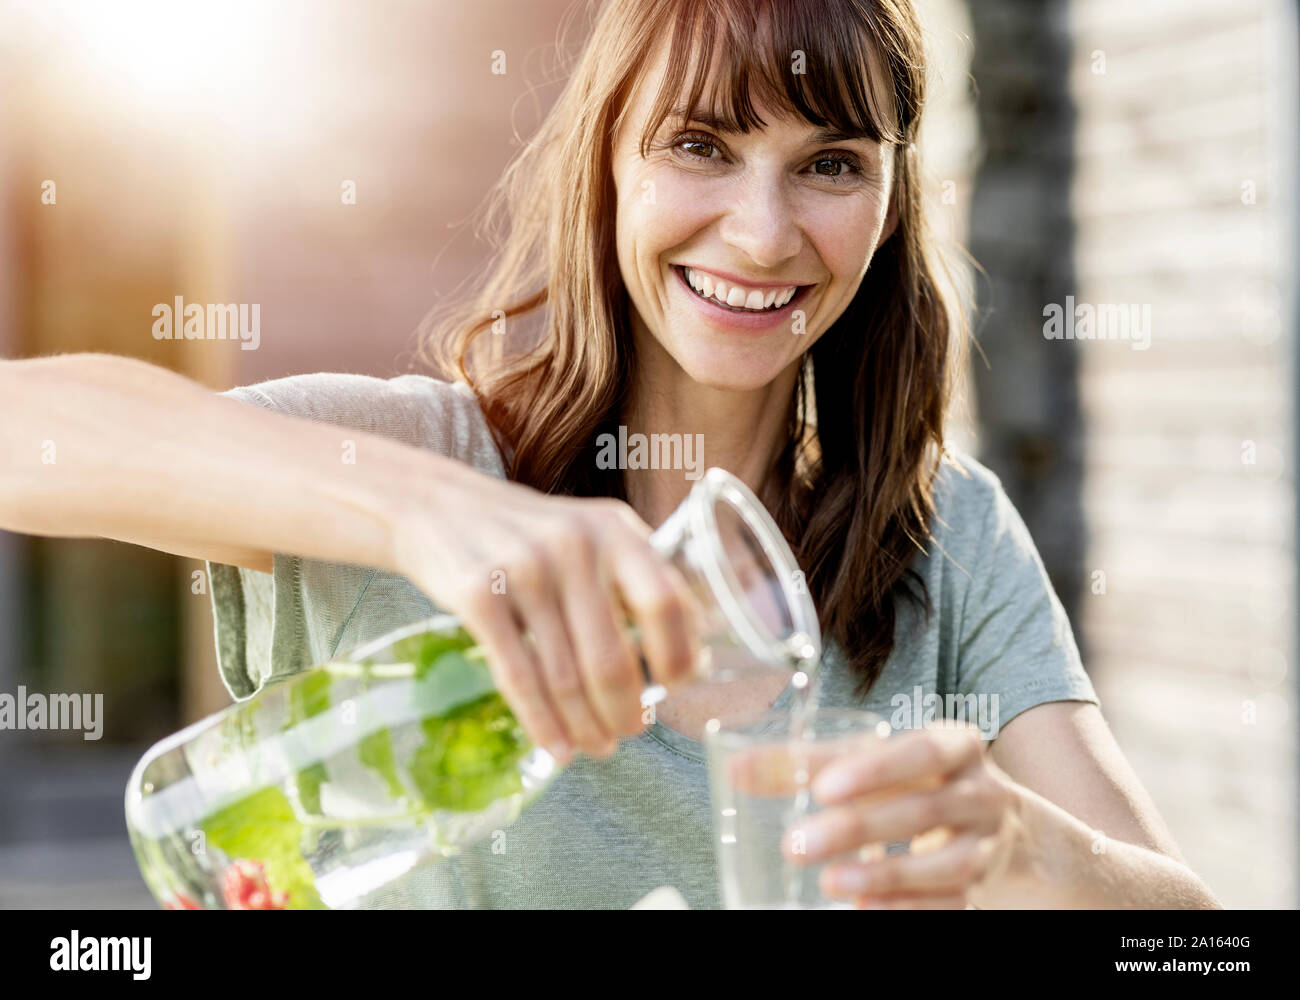 Portrait of happy woman pouring infused water into glass Stock Photo